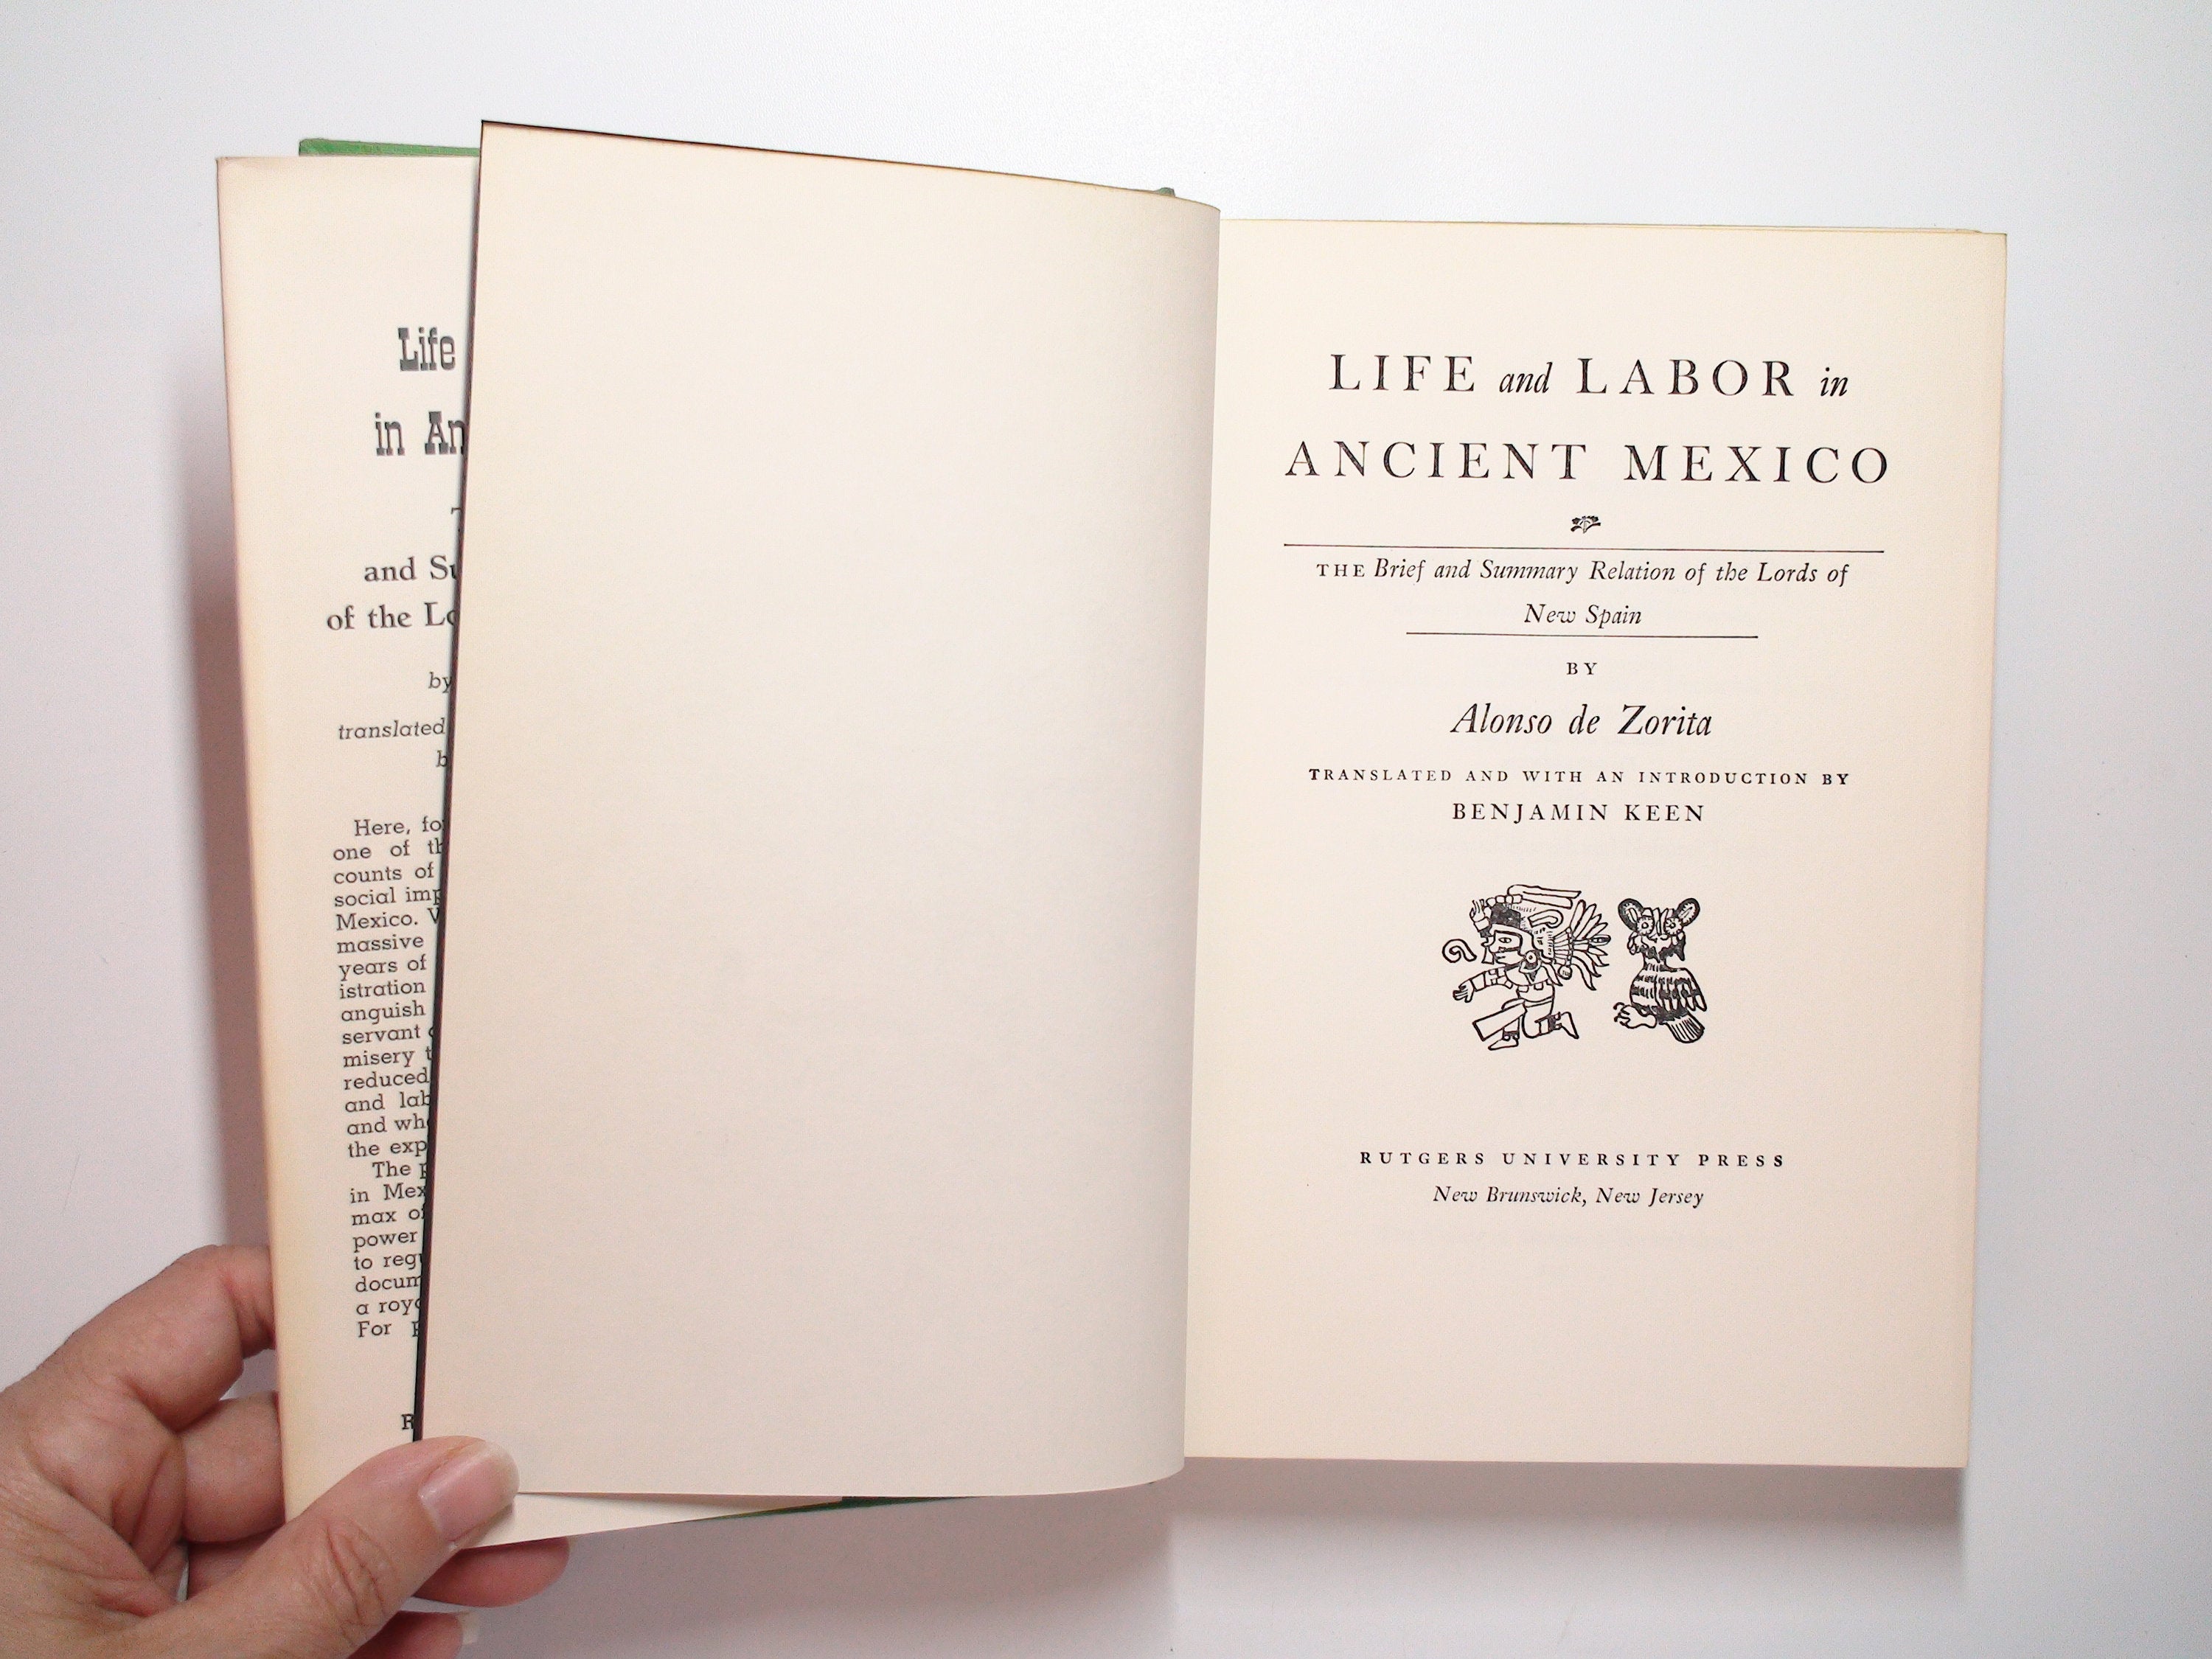 Life and Labor in Ancient Mexico, by Alonso de Zorita, Illustrated, 1963